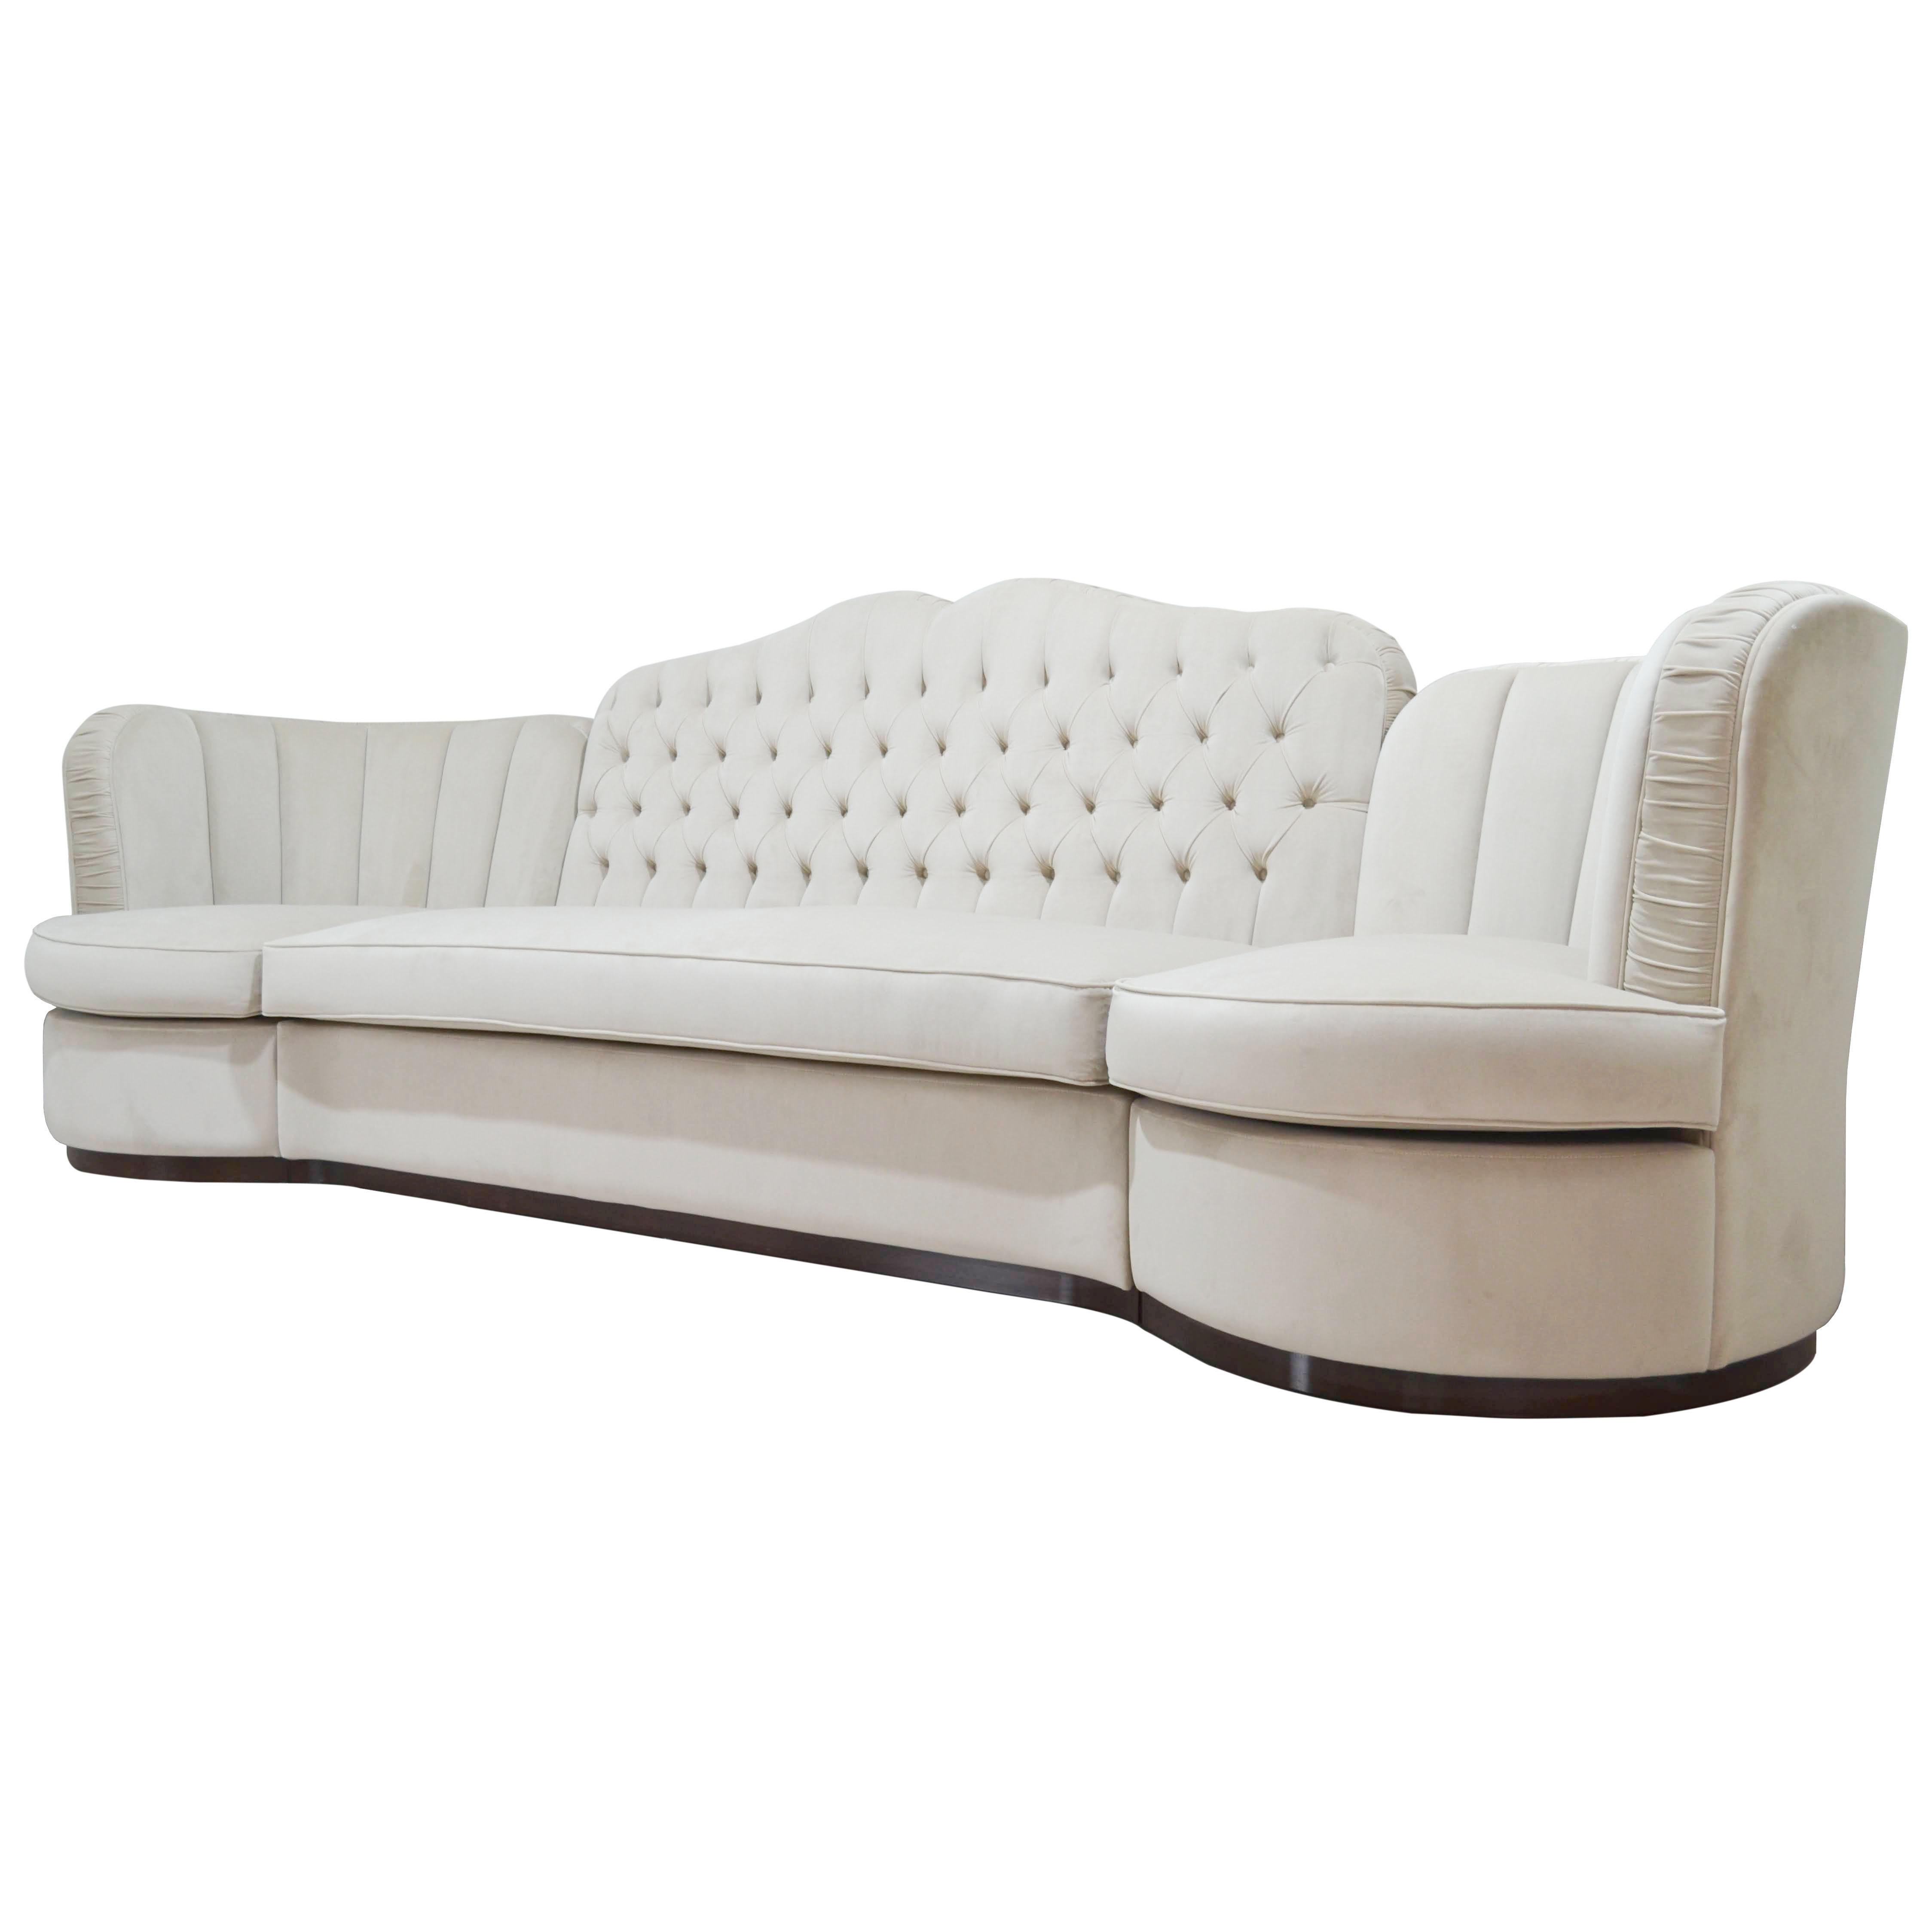 This gorgeous and large scale modernist sofa was handcrafted by artisans in Italy, by Cavio Casa, based off a classic design. Spanning over eight feet in length, this beautiful sofa offers elegant proportions and sweeping dramatic curves throughout